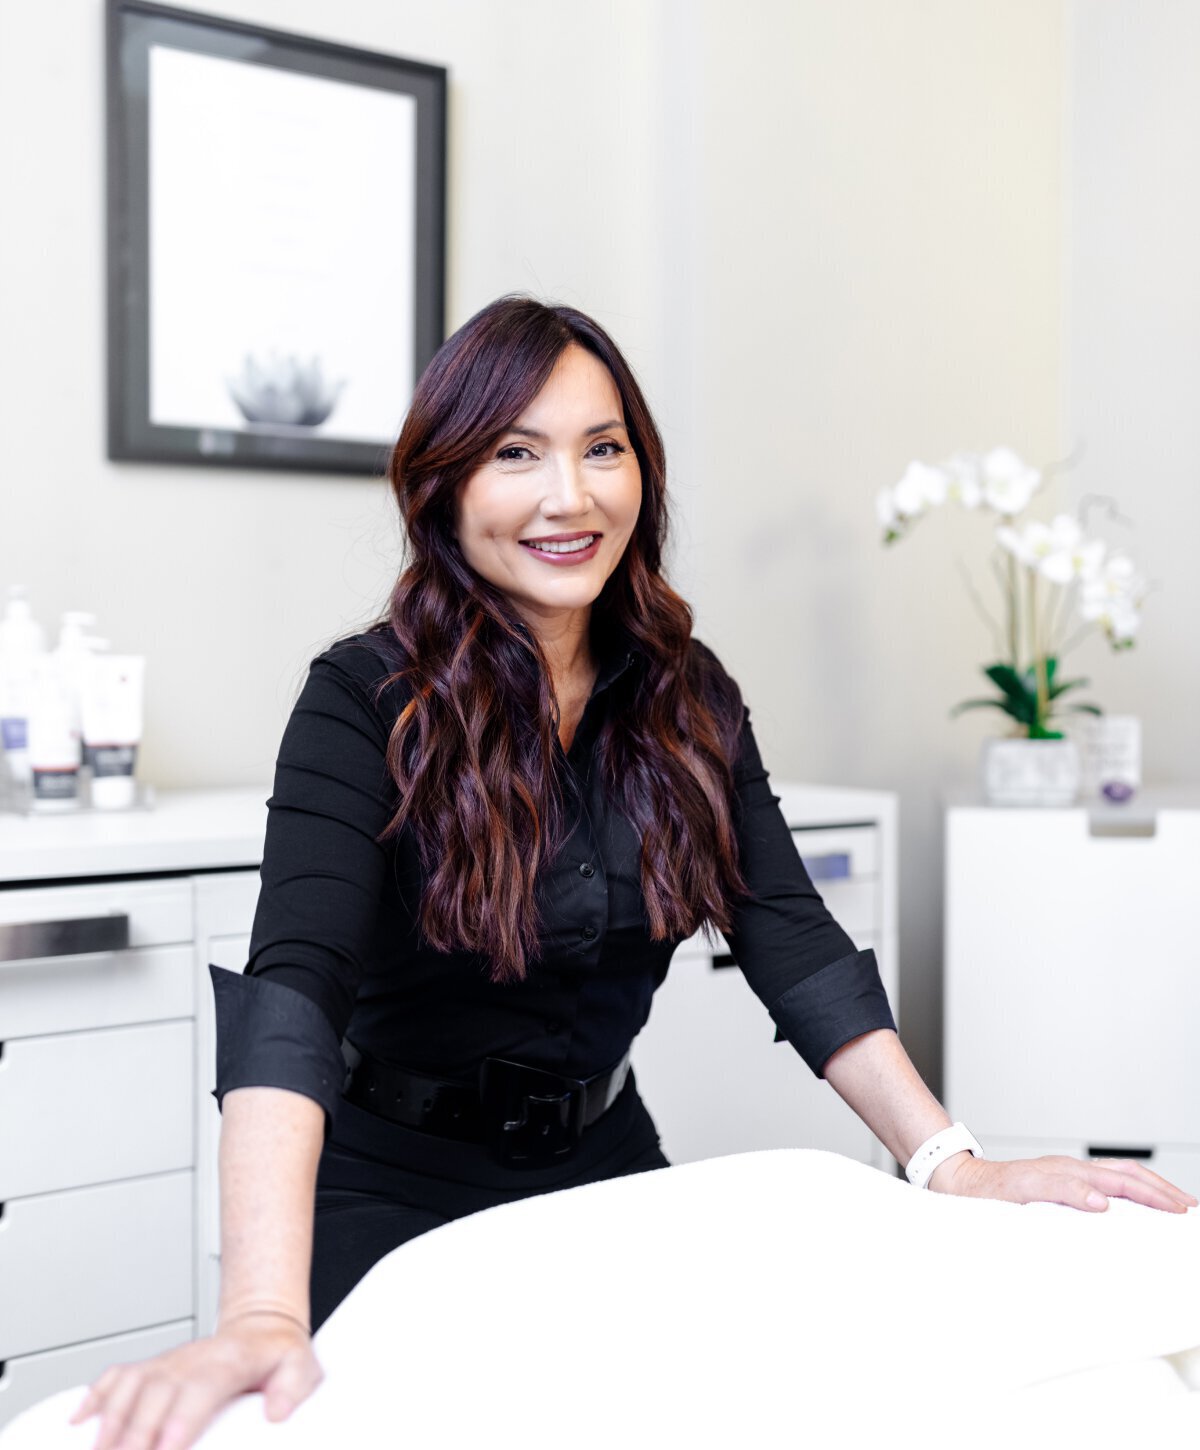 Bay Area Med Spa & Skincare specialist Terrie Absher